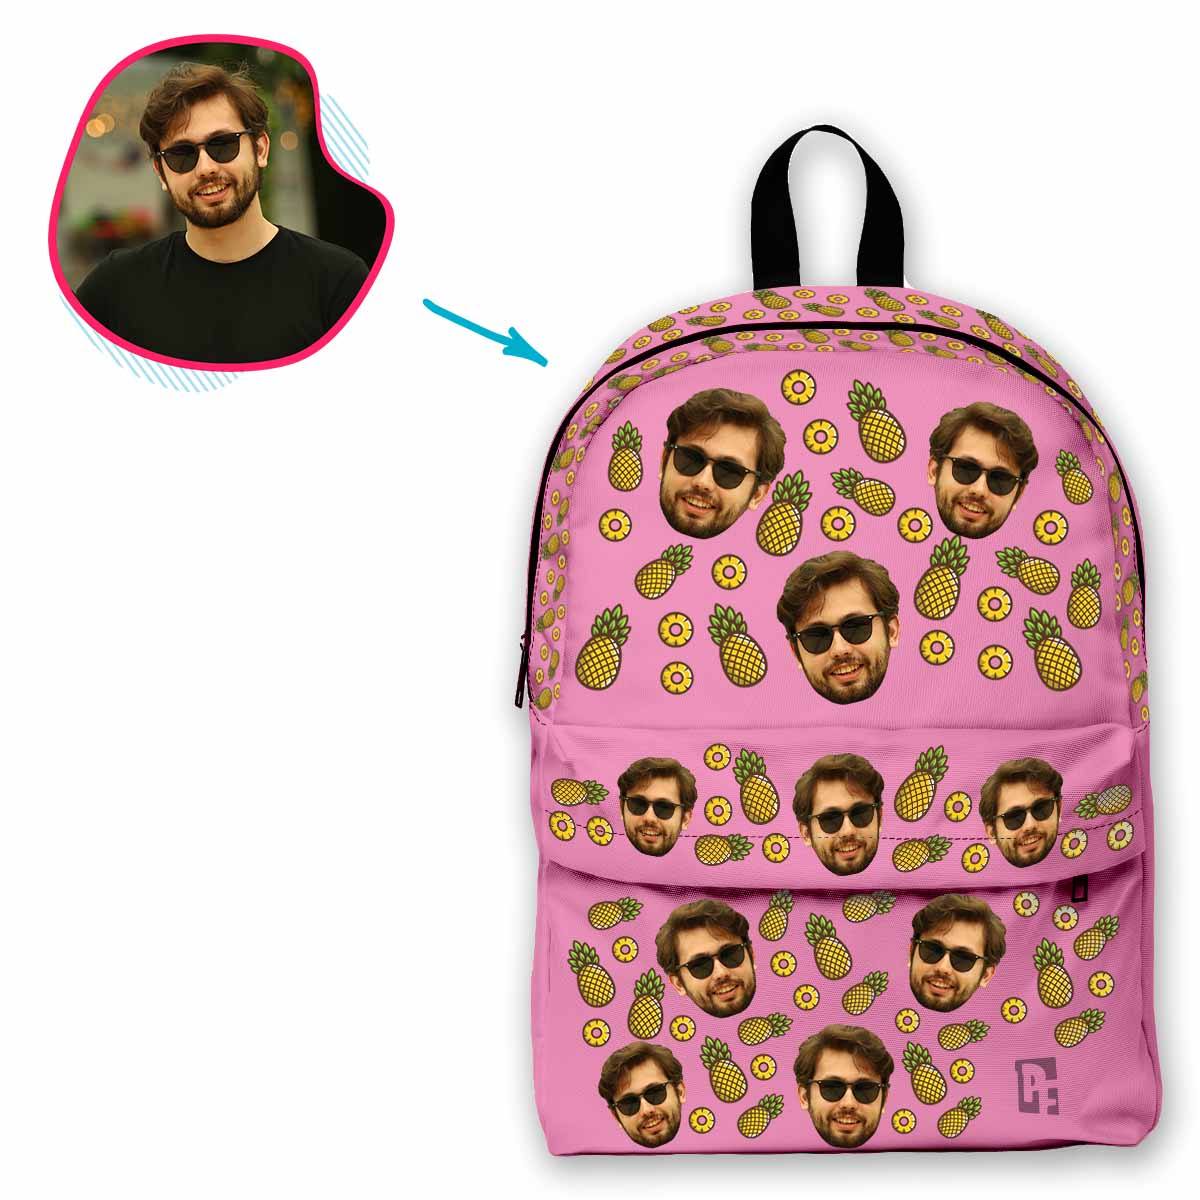 pink Fruits classic backpack personalized with photo of face printed on it